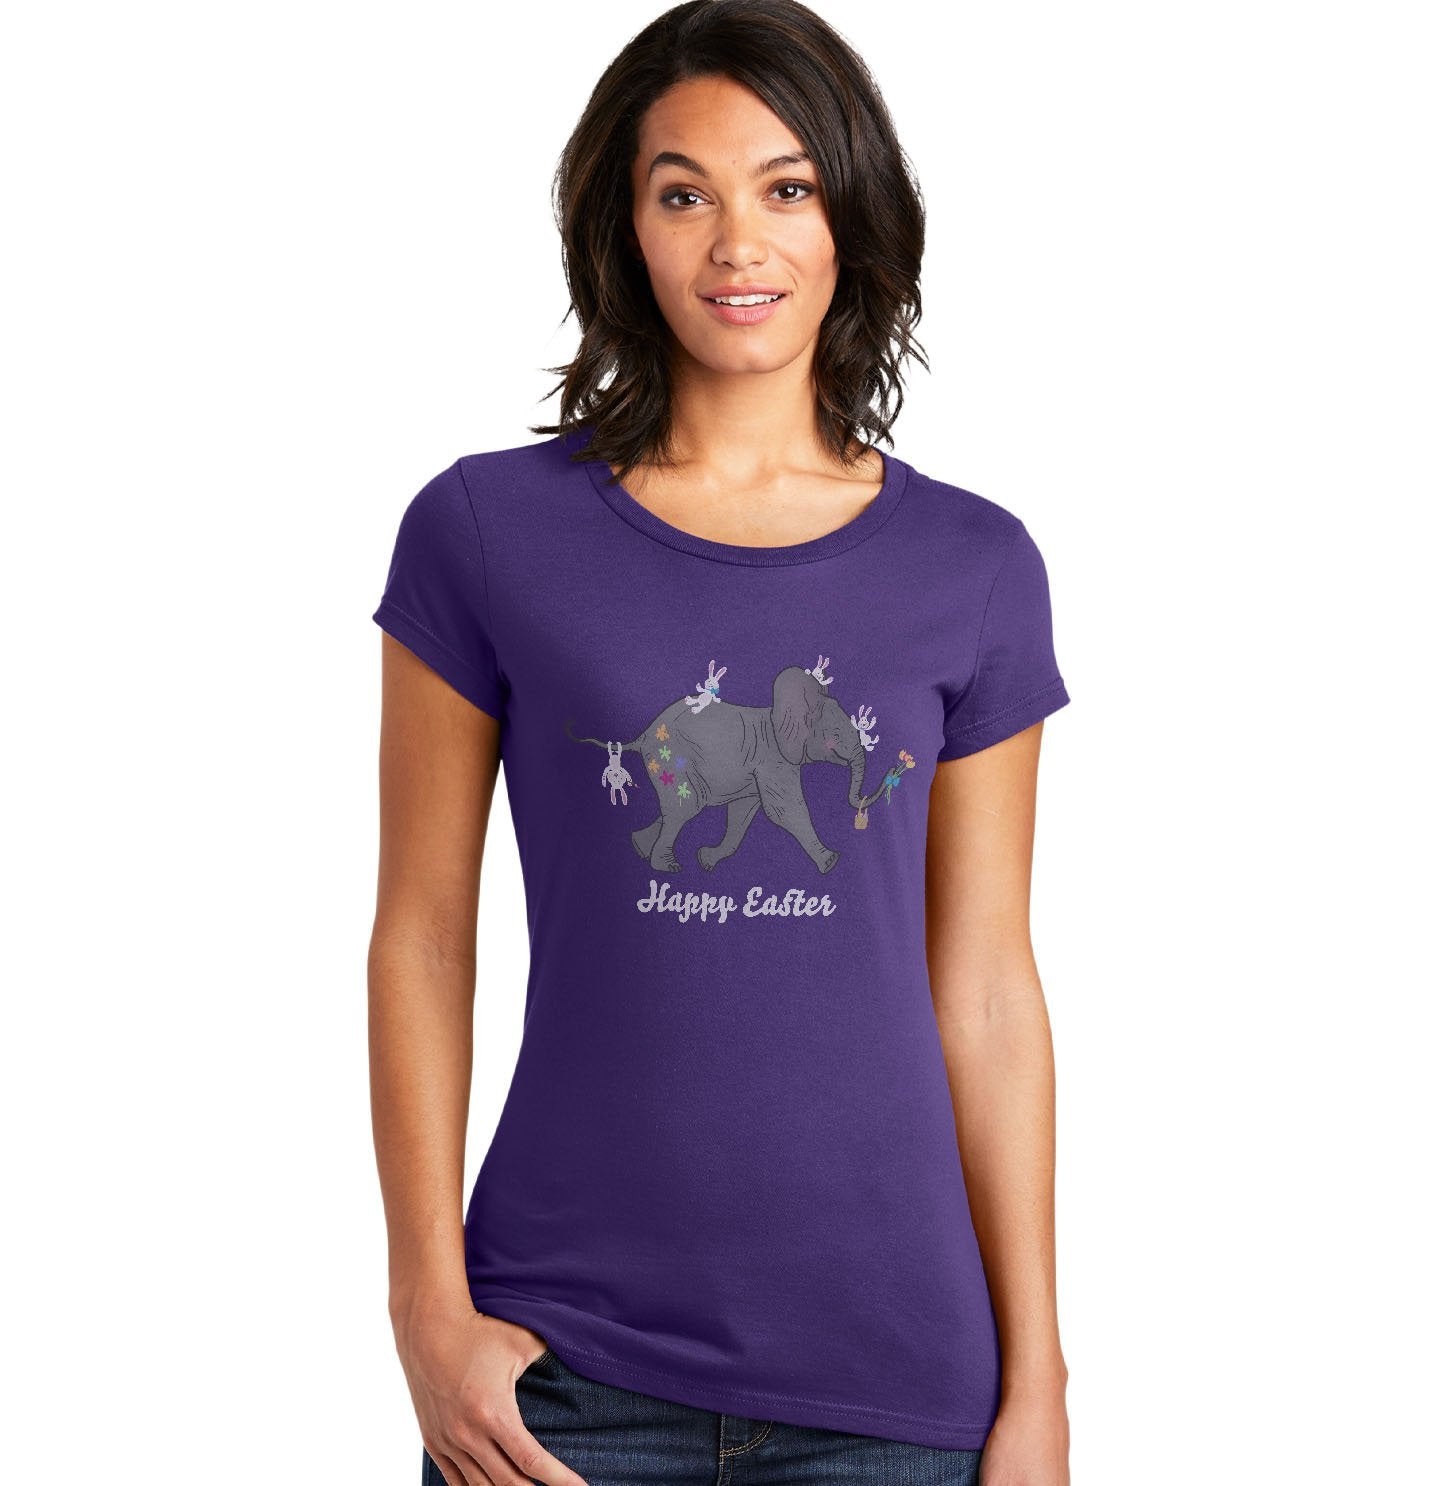 Animal Pride - Easter Baby Elephant and Friends  - Women's Fitted T-Shirt